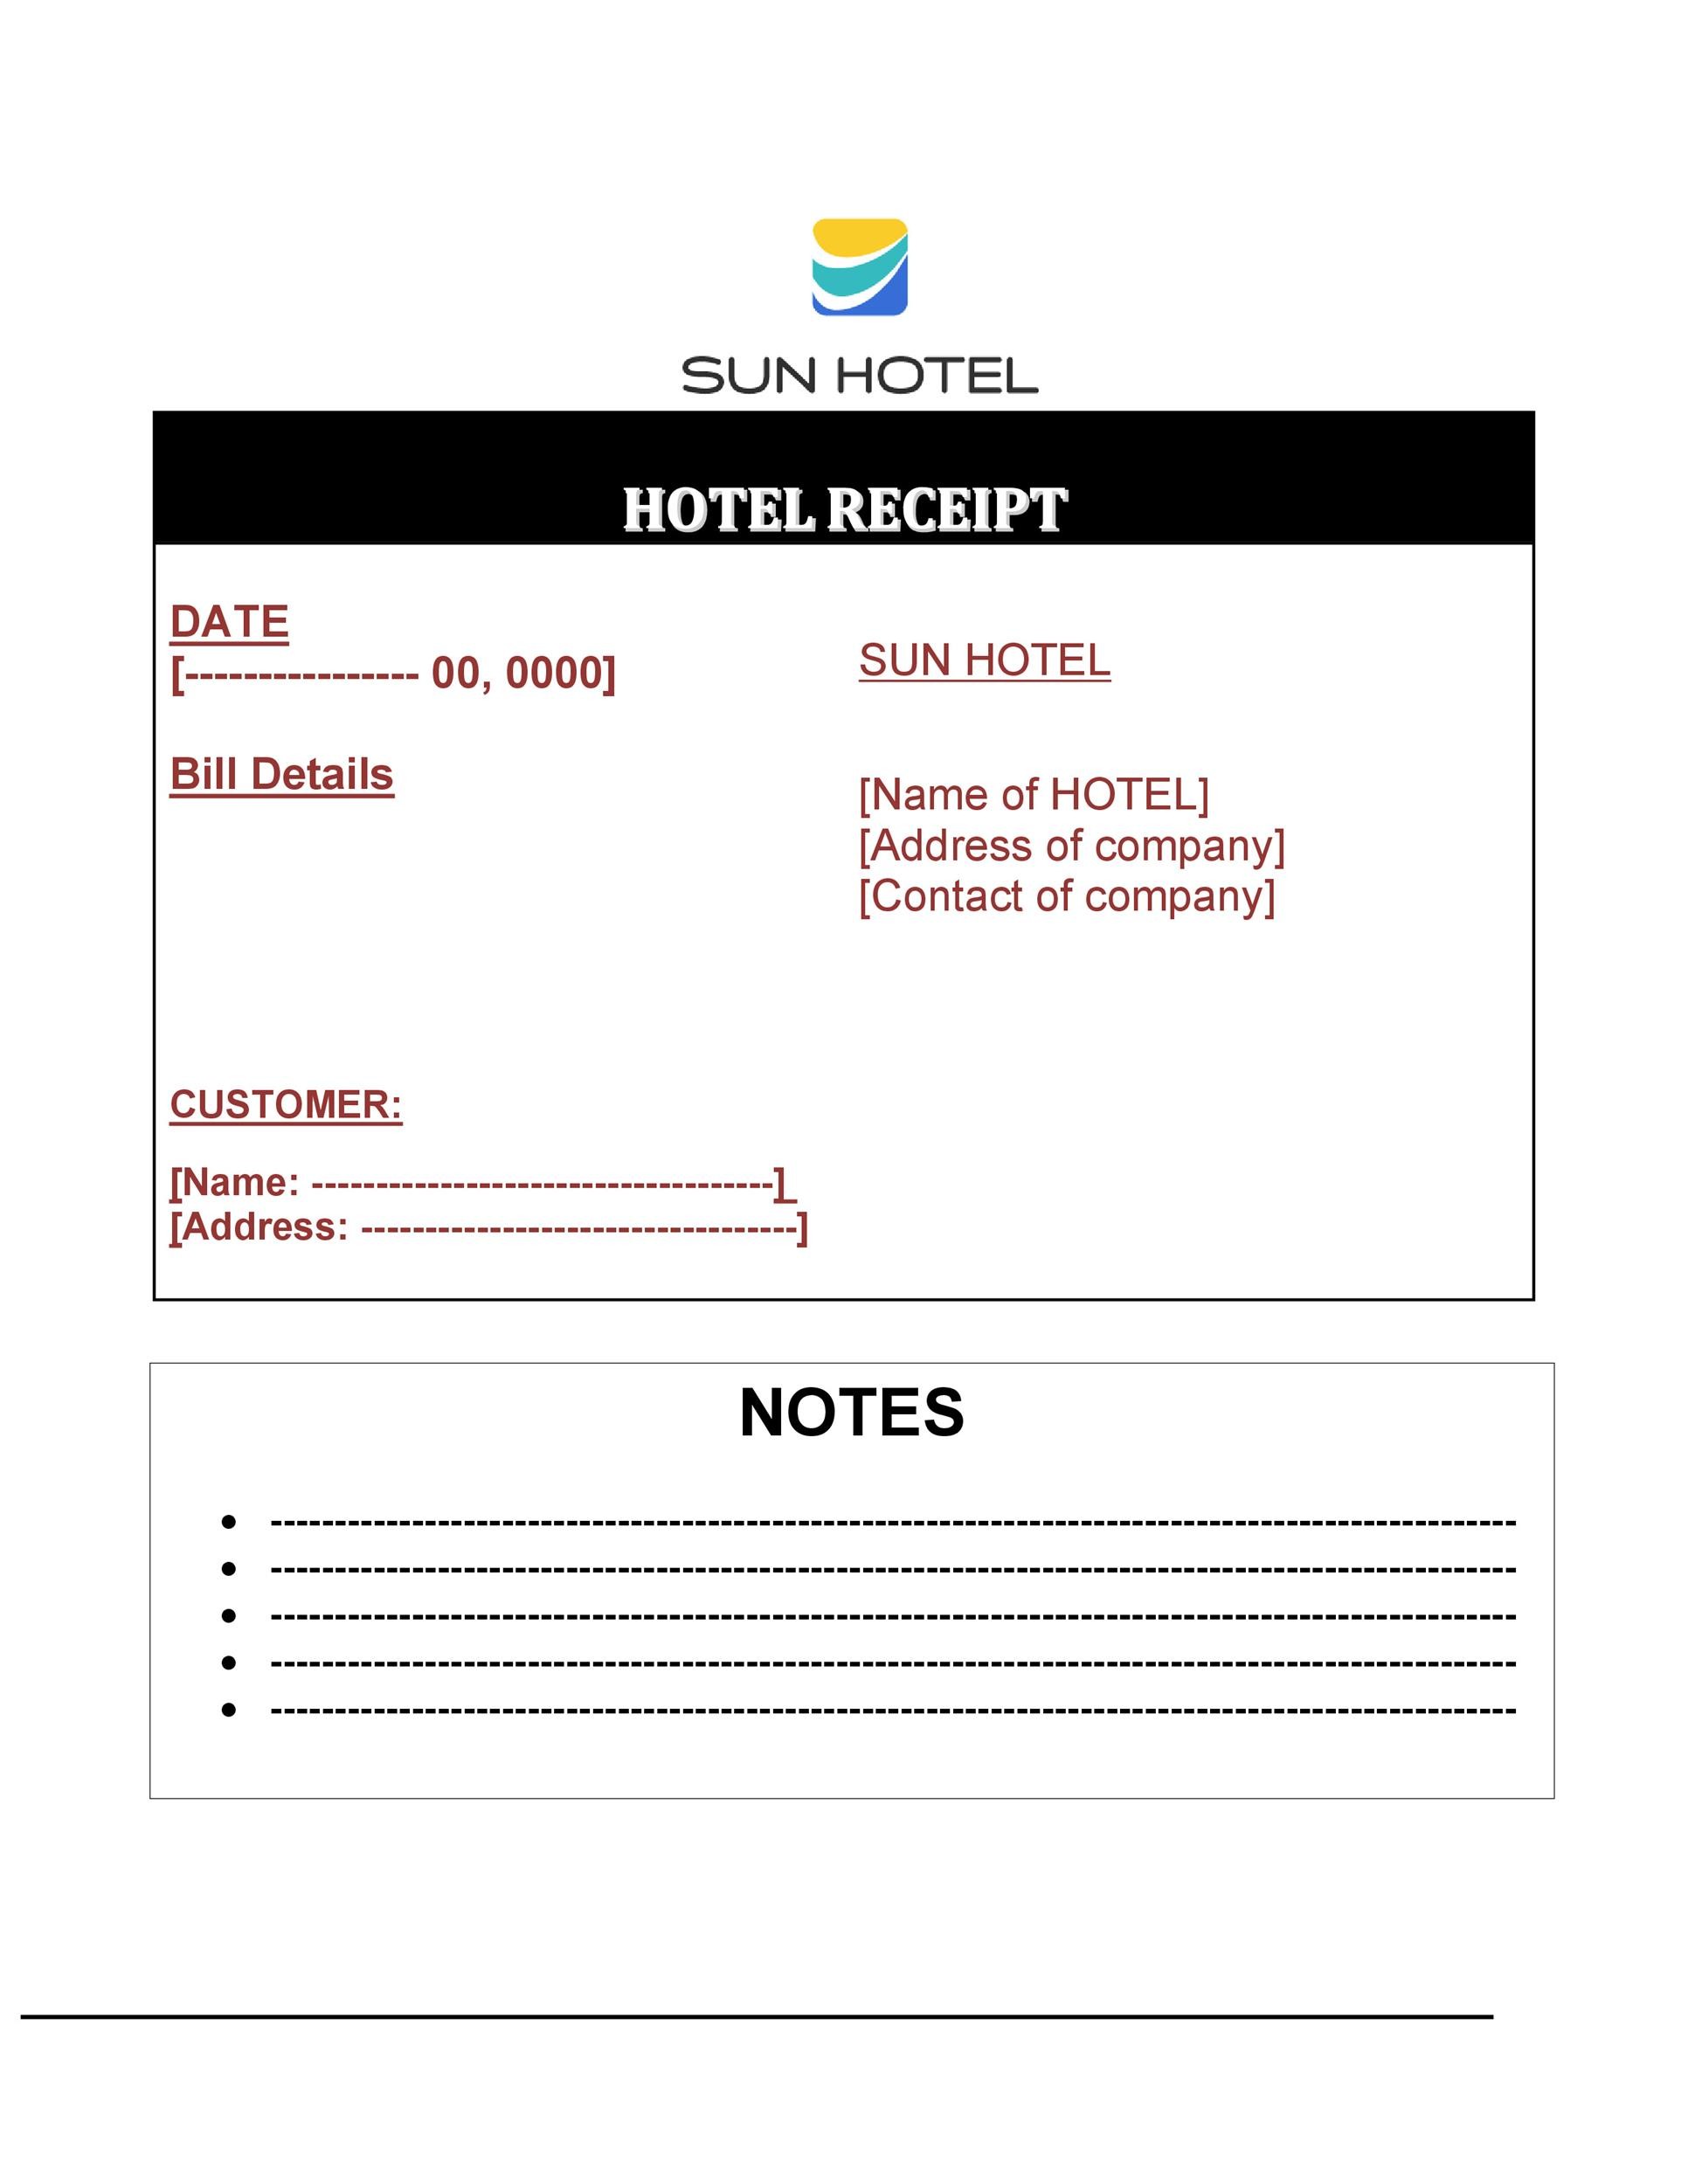 33 Real Fake Hotel Receipt Templates ᐅ Template Lab